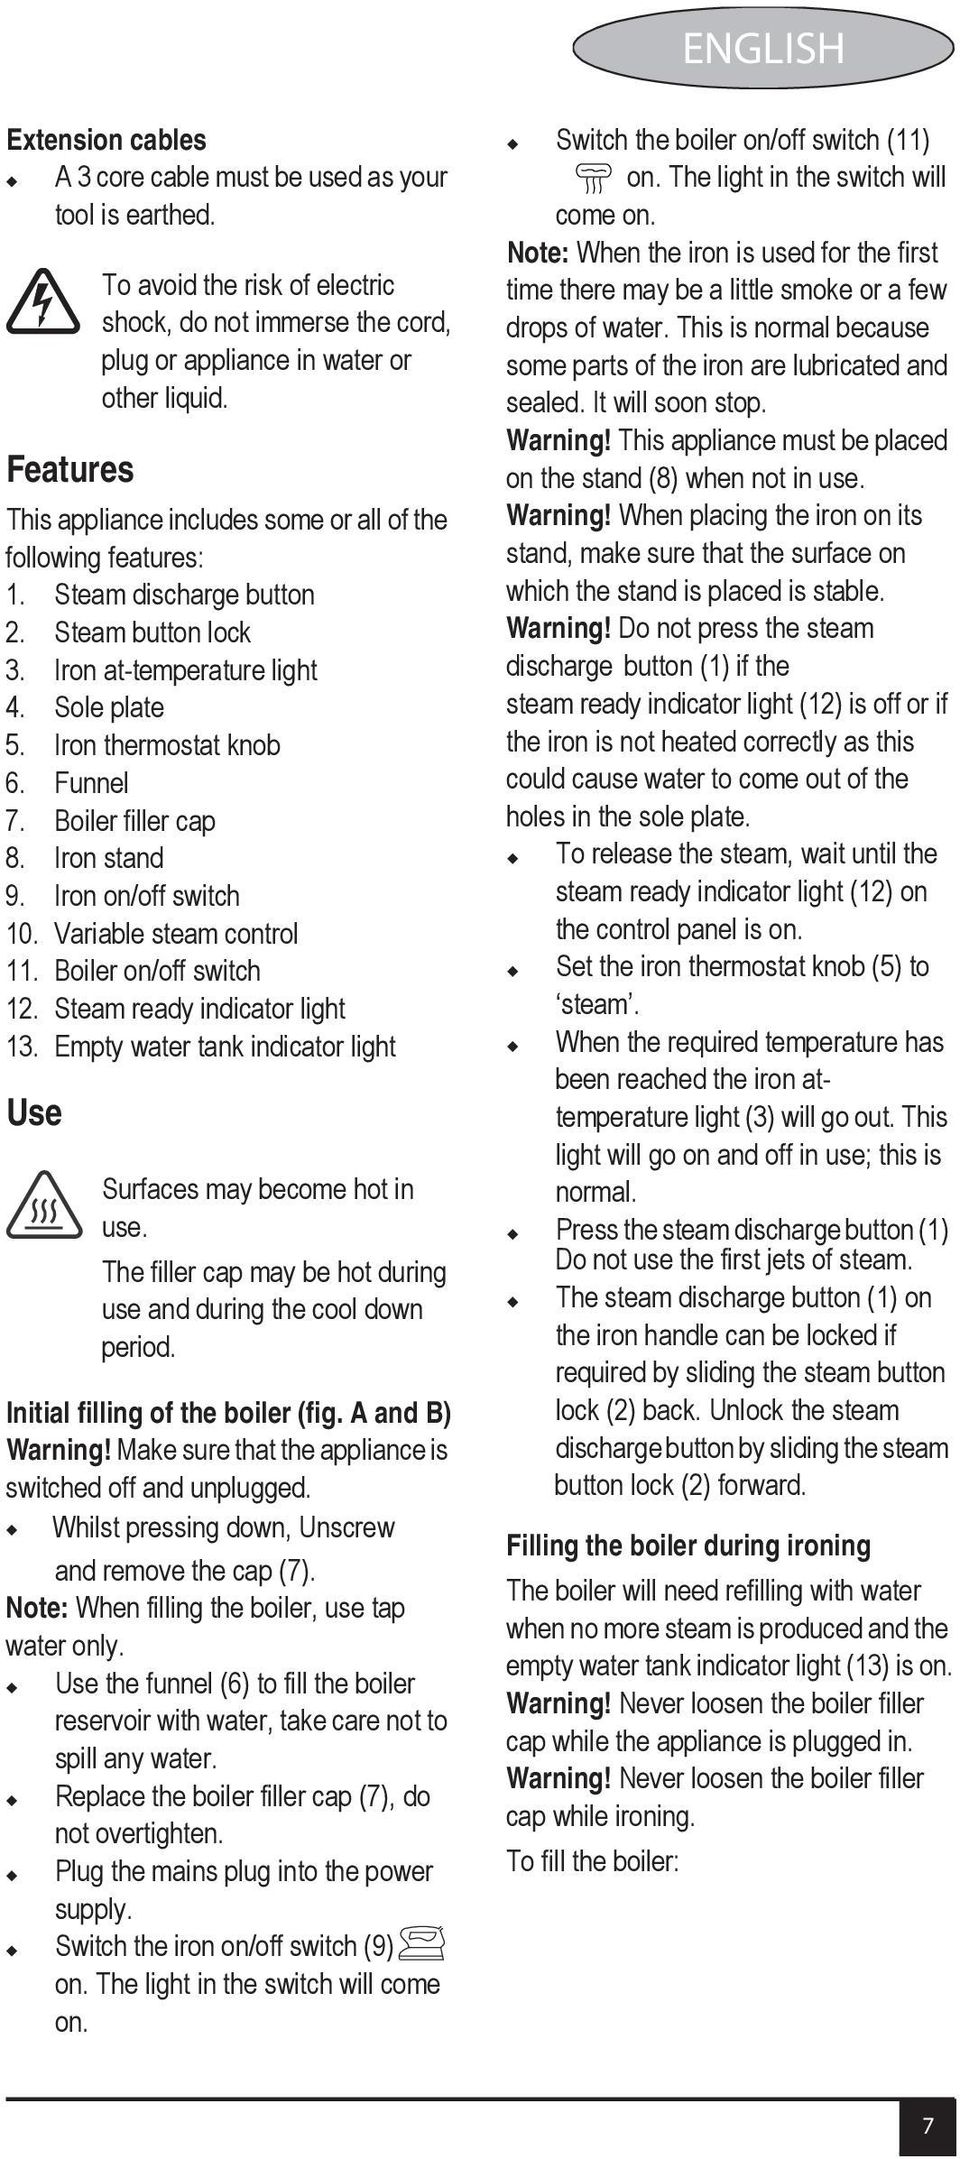 Steam ready indicator light 13. Empty water tank indicator light Use To avoid the risk of electric shock, do not immerse the cord, plug or appliance in water or other liquid.